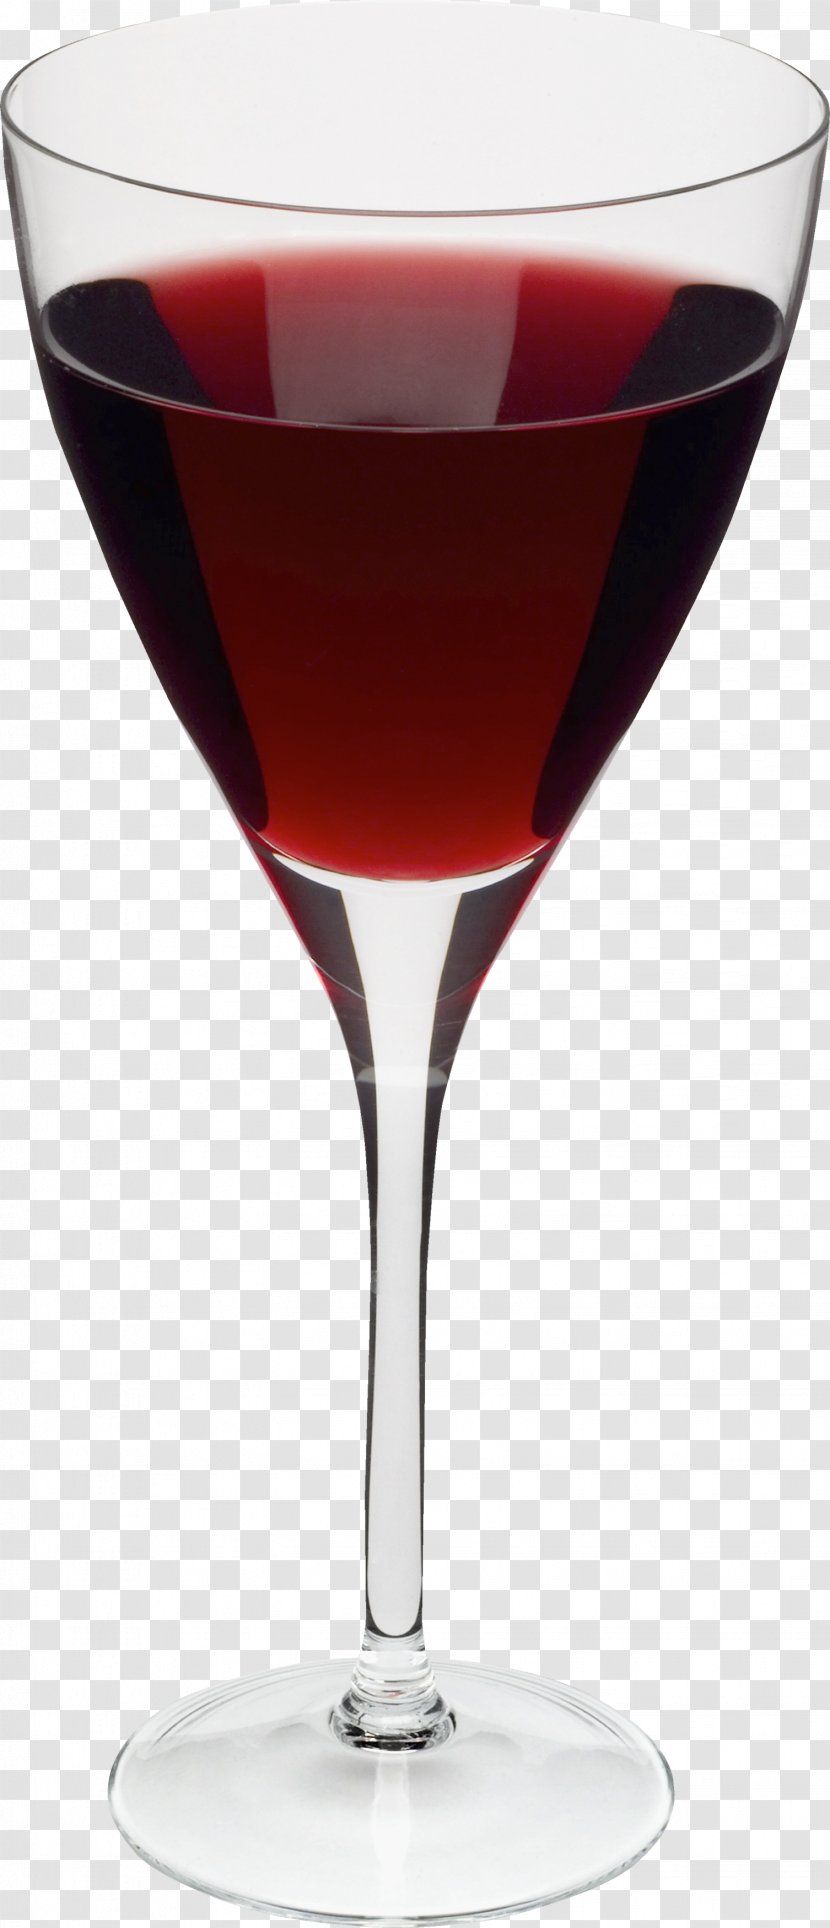 Red Wine Glass Clip Art - Cup - Image Transparent PNG